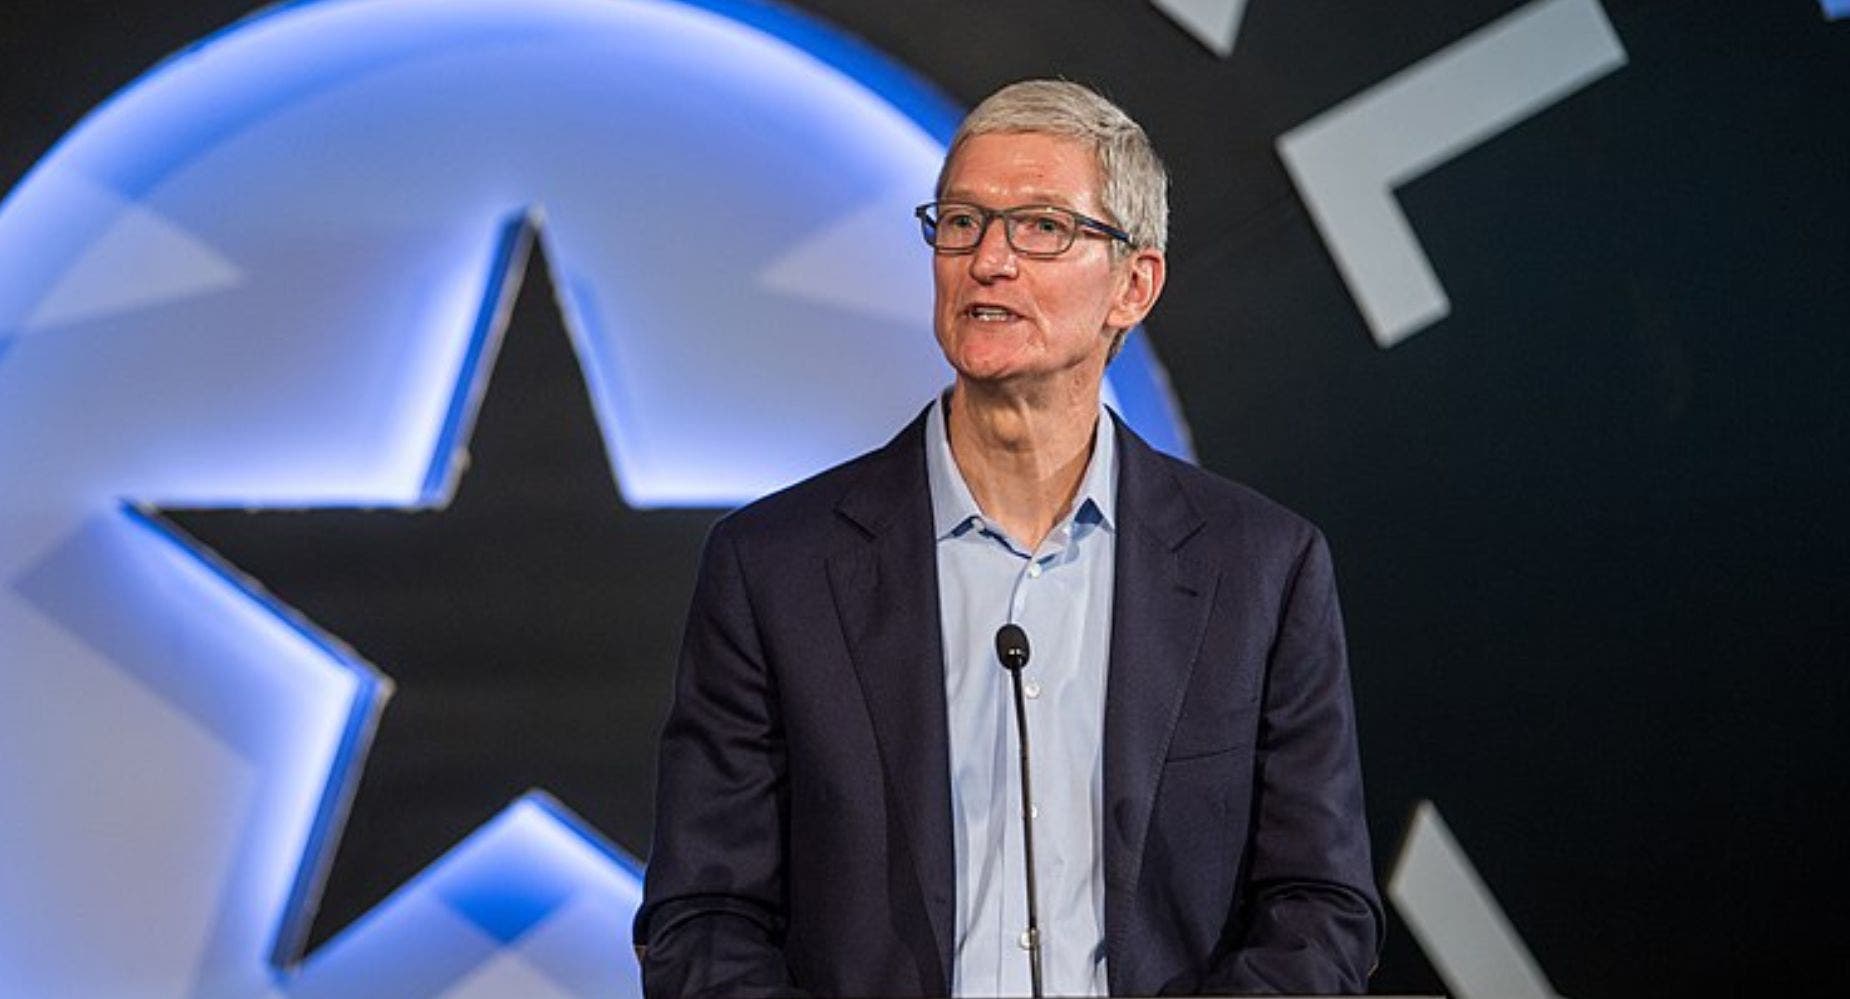 Apple's Tim Cook On The Metaverse: 'I'm Not Sure The Average Person Can Tell You What It Is'